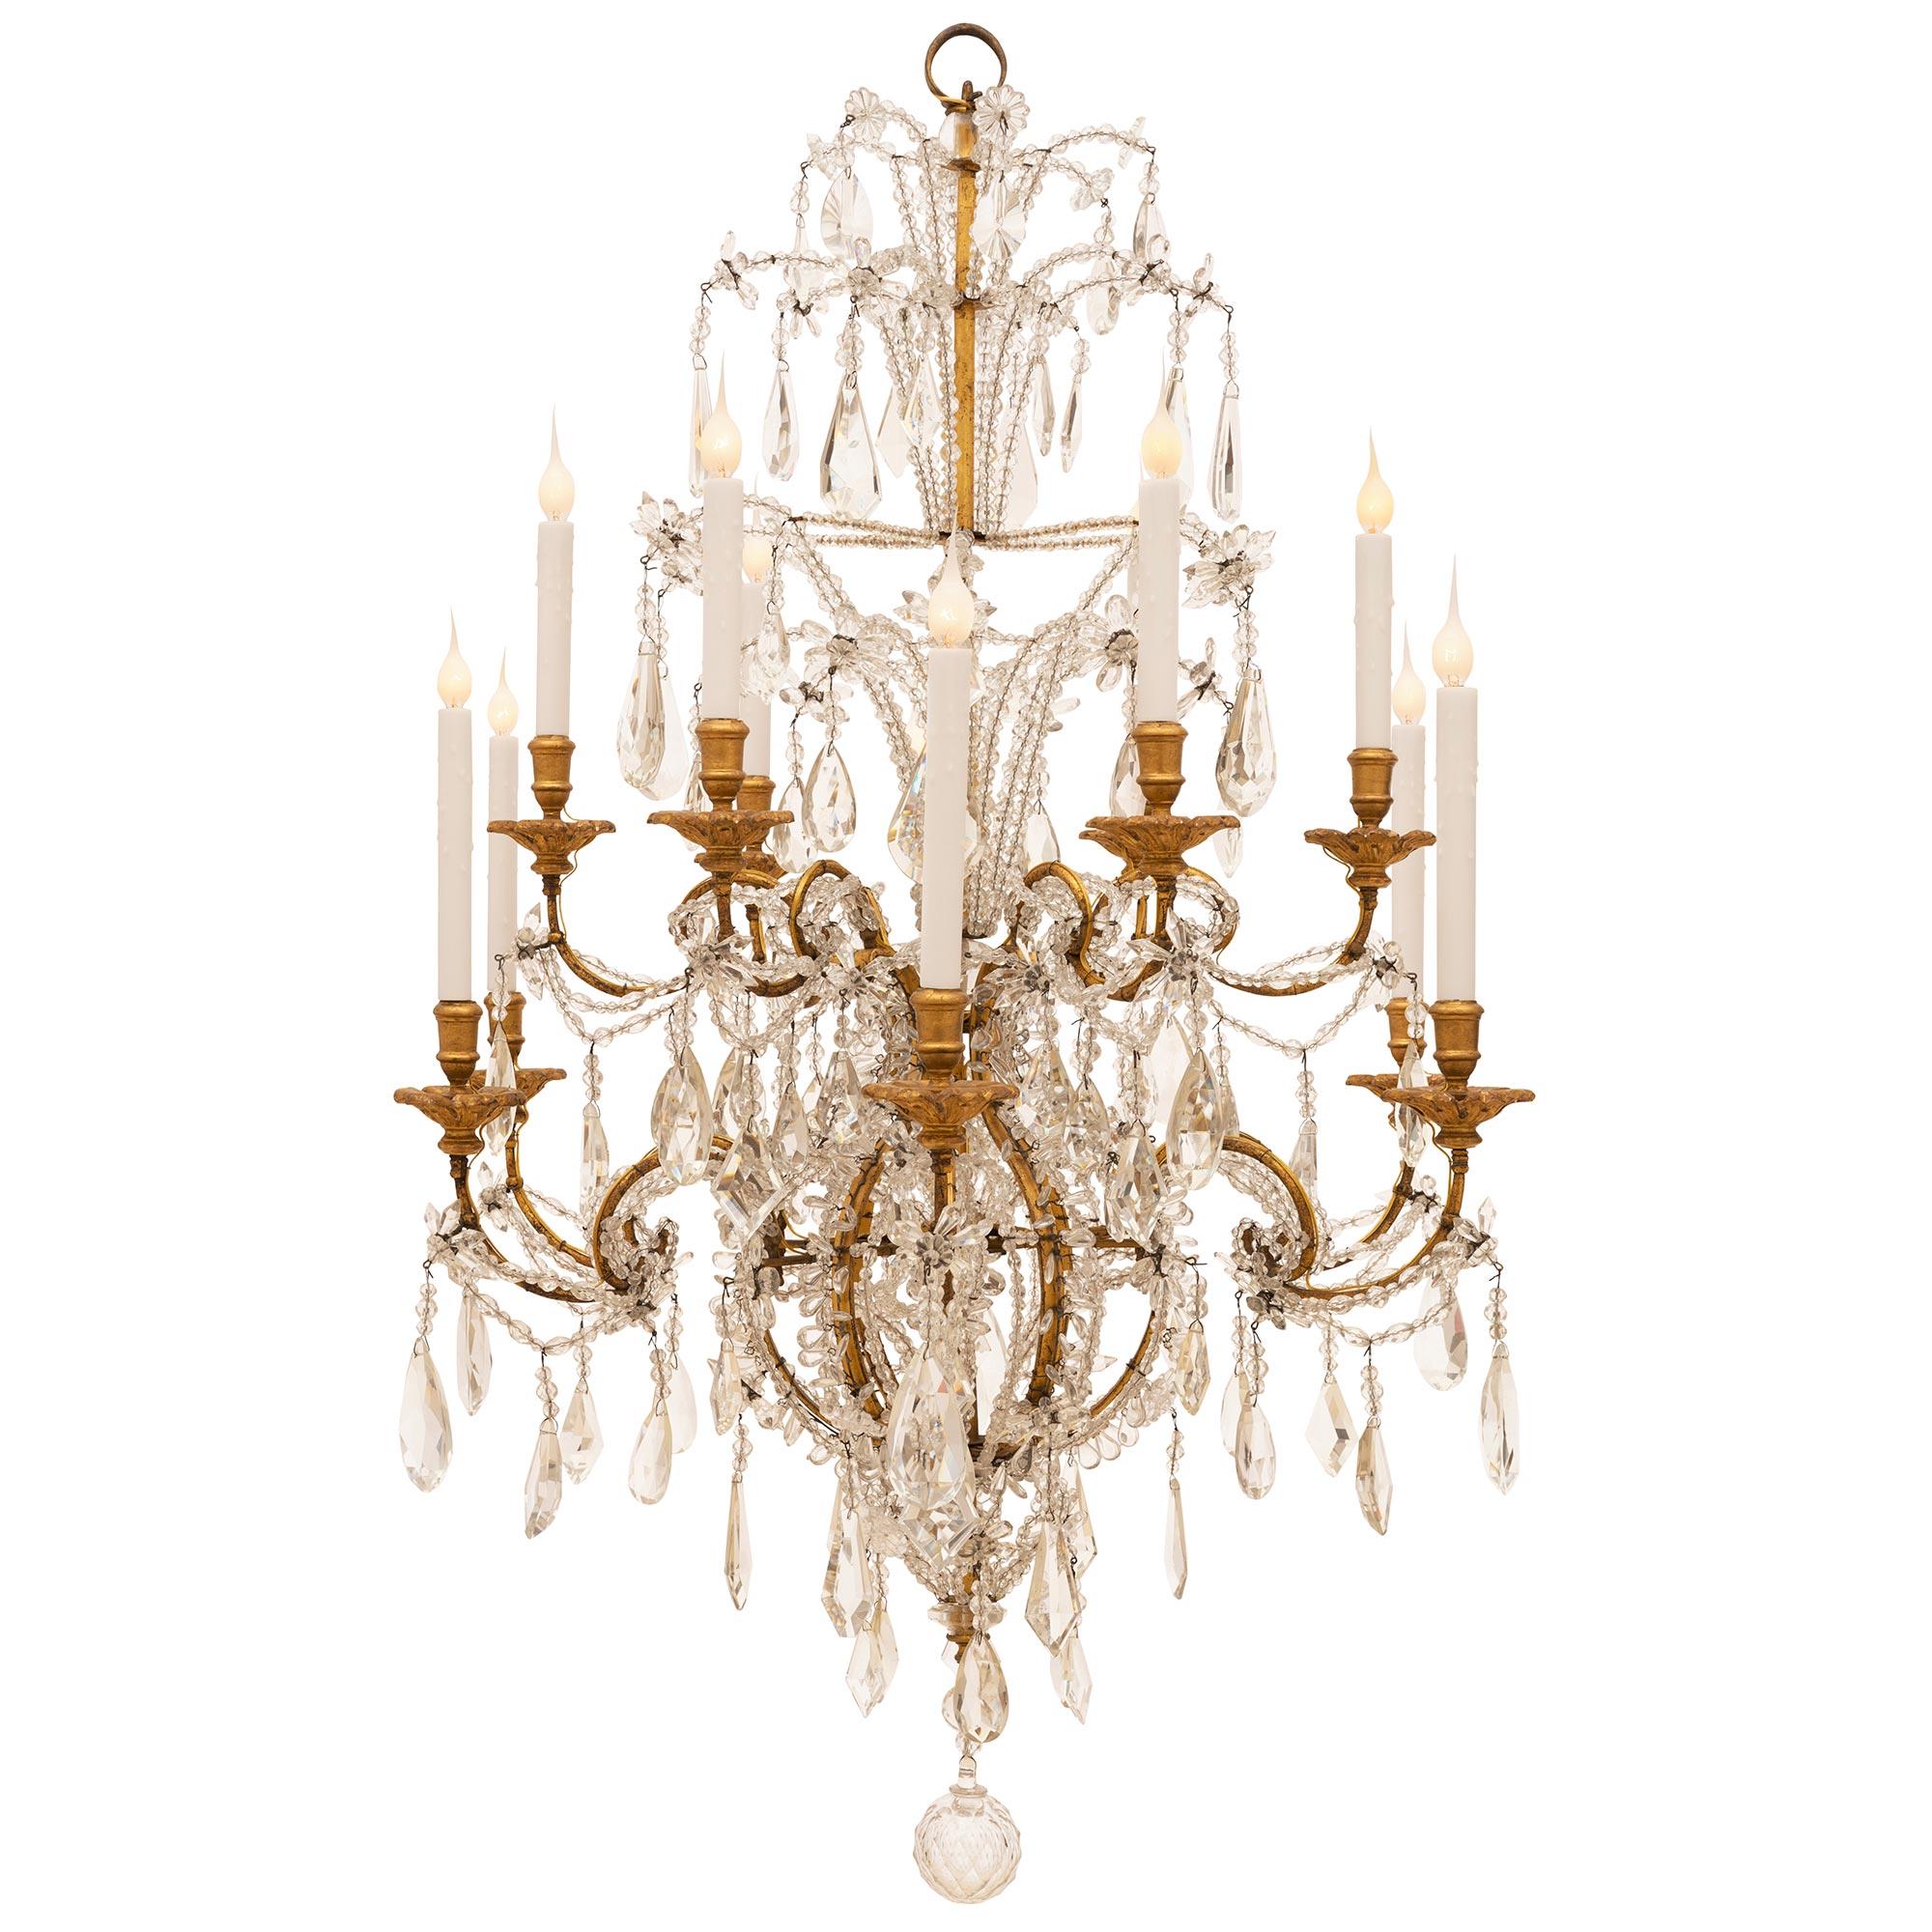 Italian Early 19th Century Crystal Chandelier from the Torino Region In Good Condition For Sale In West Palm Beach, FL